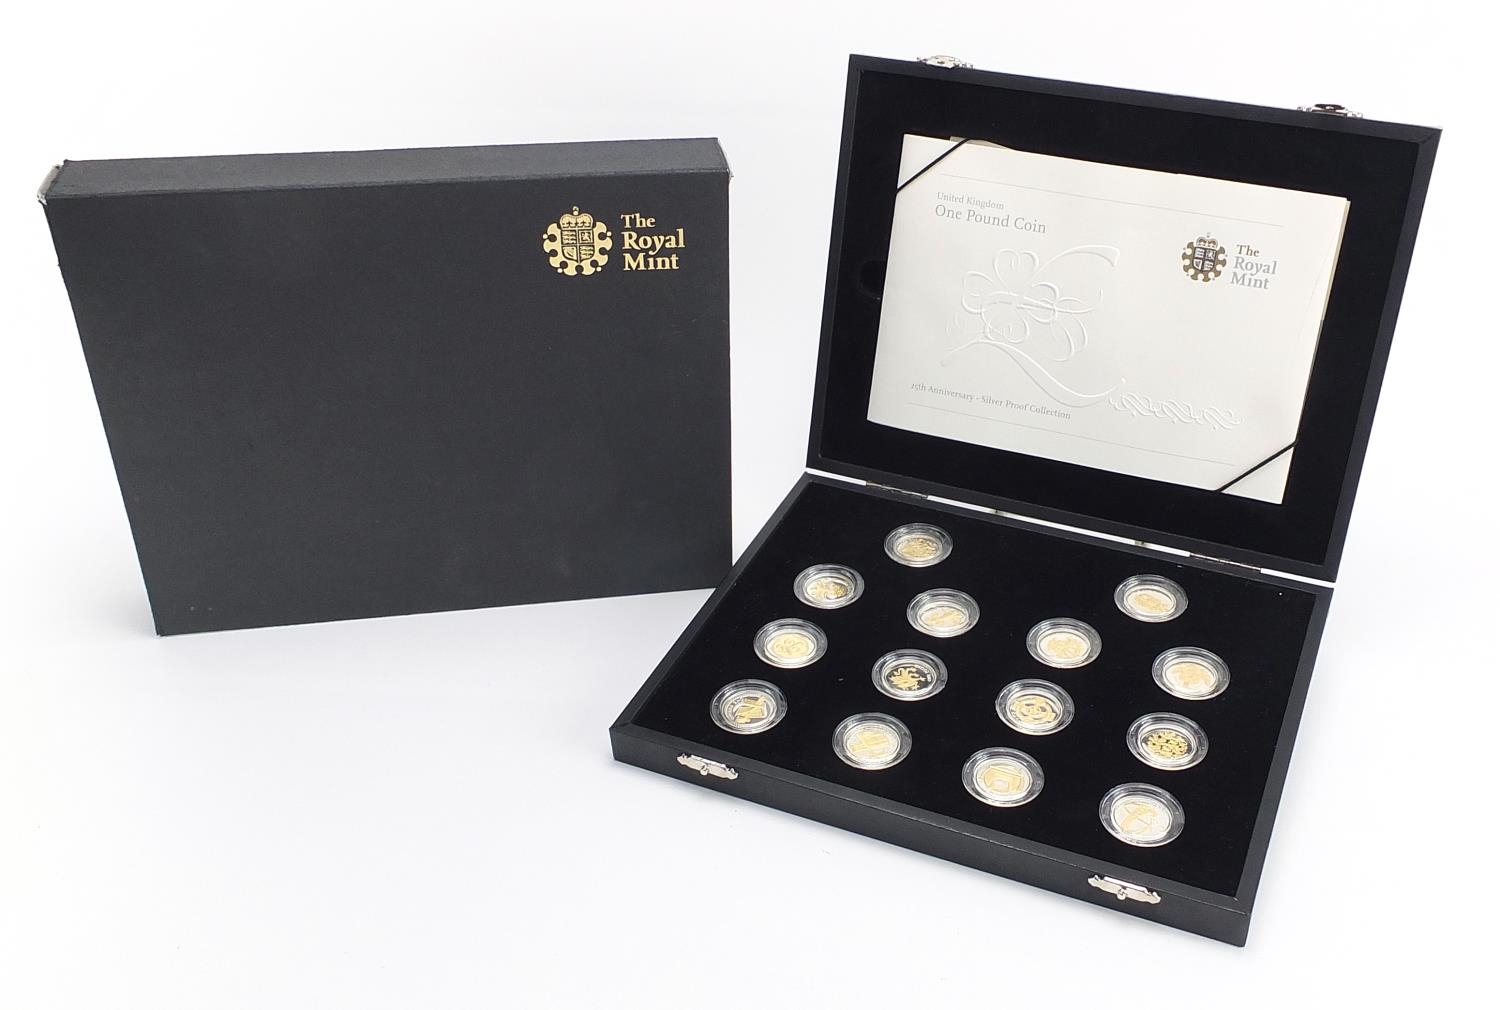 United Kingdom one pound coin 25th Anniversary Silver Proof Collection arranged in a fitted case